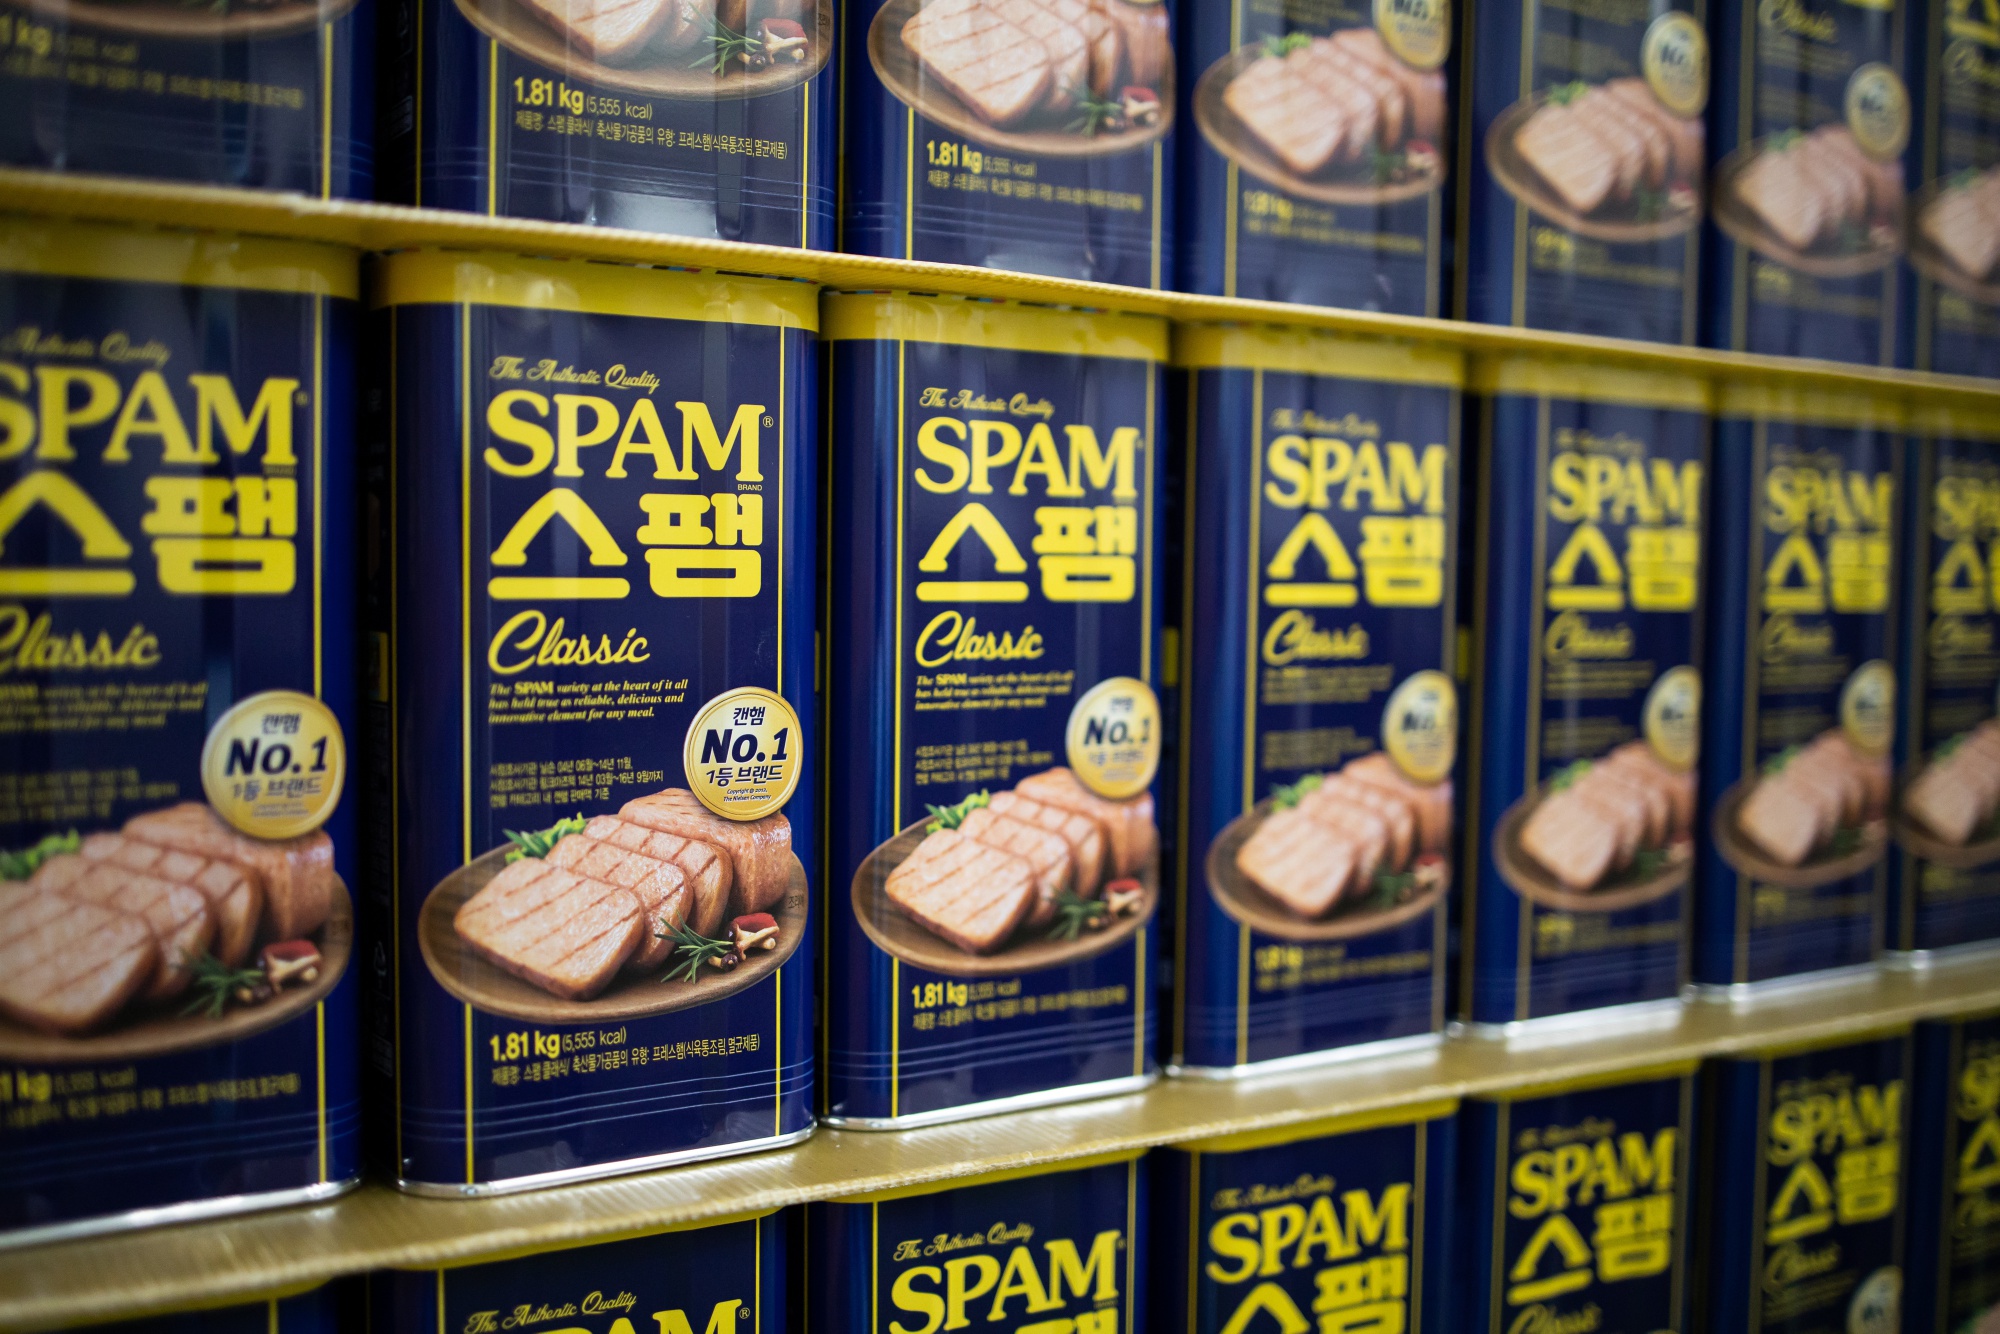 Spam Sales Are Booming With Consumers Seeking Out Comfort Bloomberg